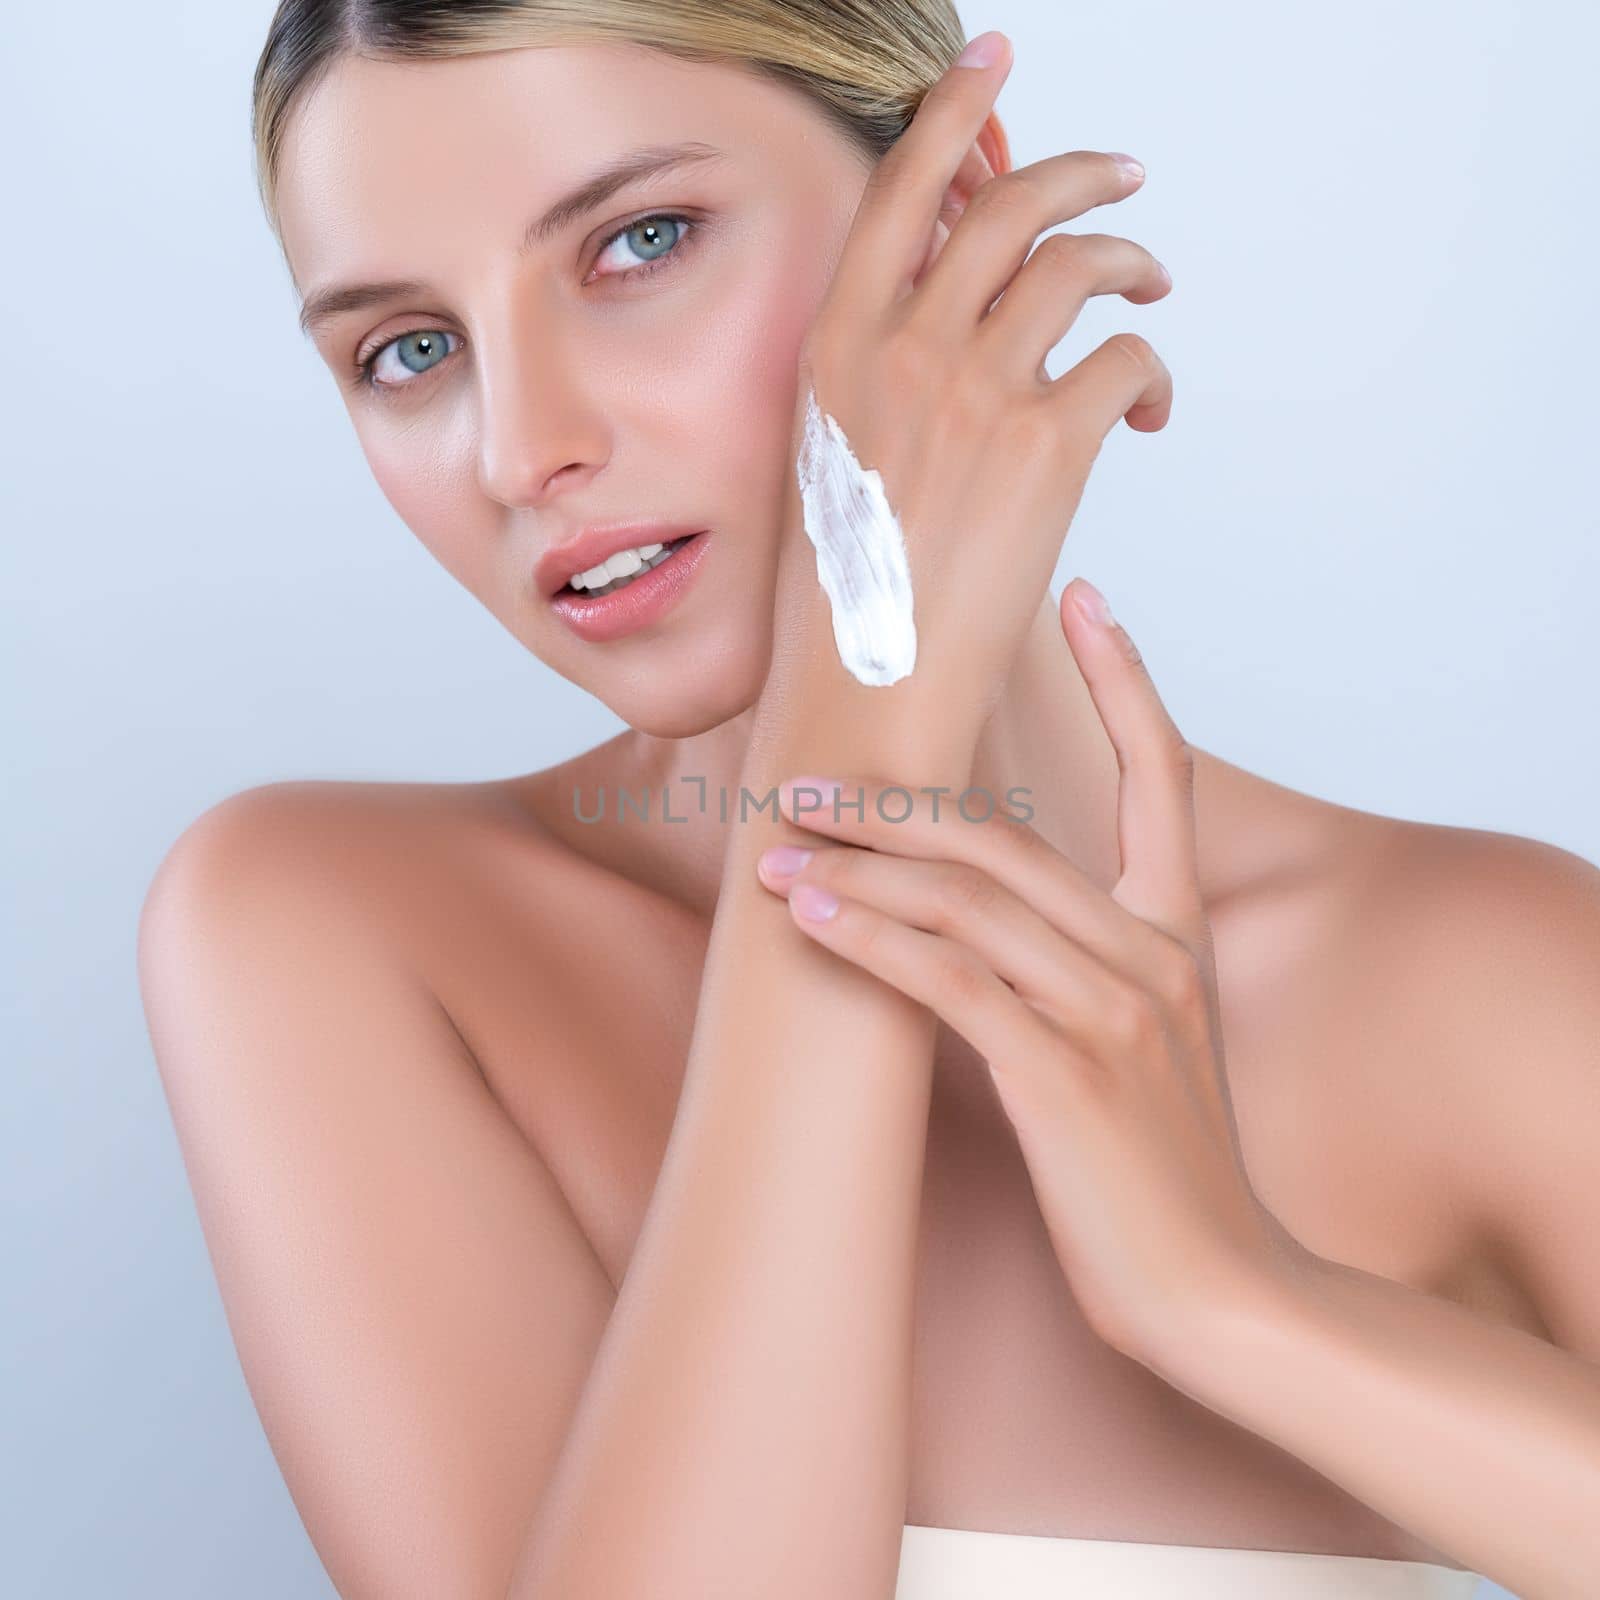 Alluring beautiful woman applying moisturizer cream on her hand for perfect skincare treatment in isolated background. Caucasian women portrait with skin rejuvenation and cosmetology concept.